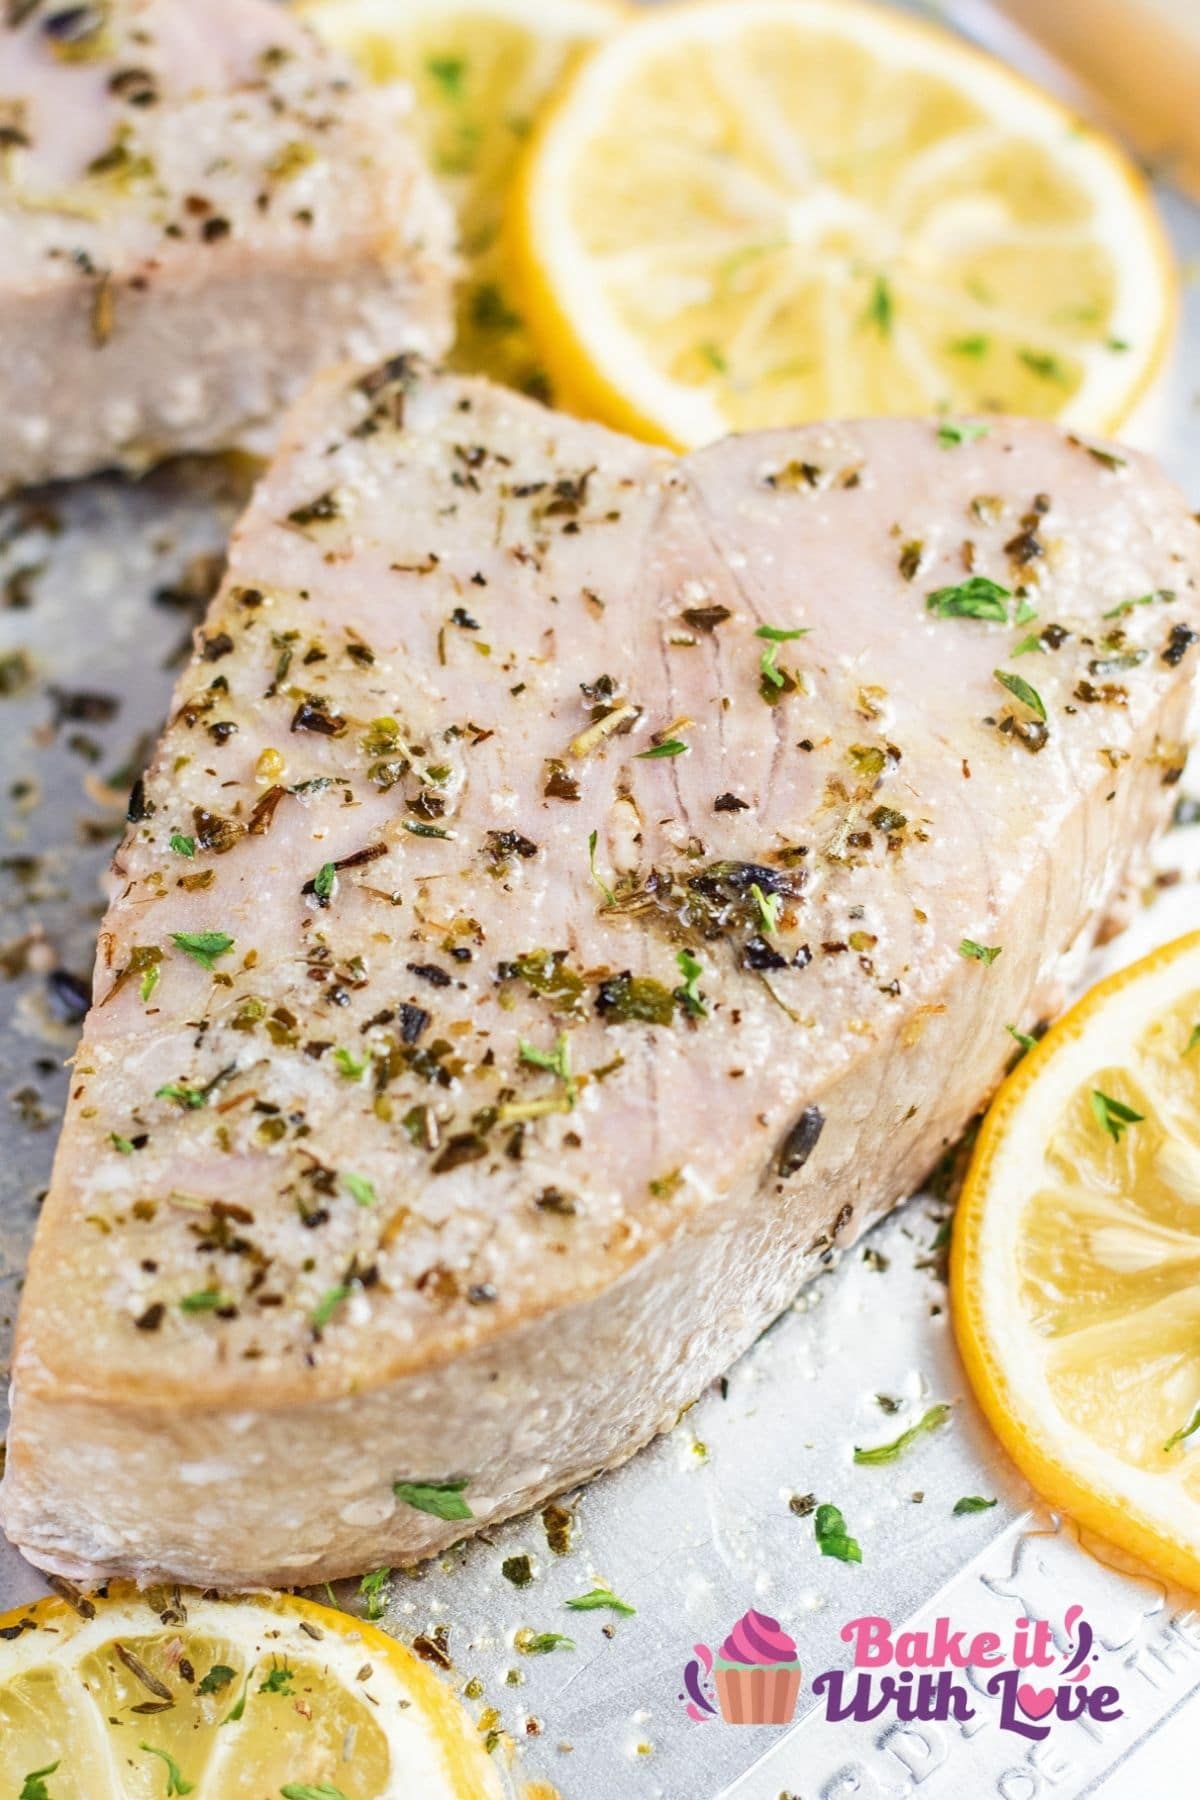 Closeup on the baked tuna steaks on sheetpan with seasoning and lemon slices.